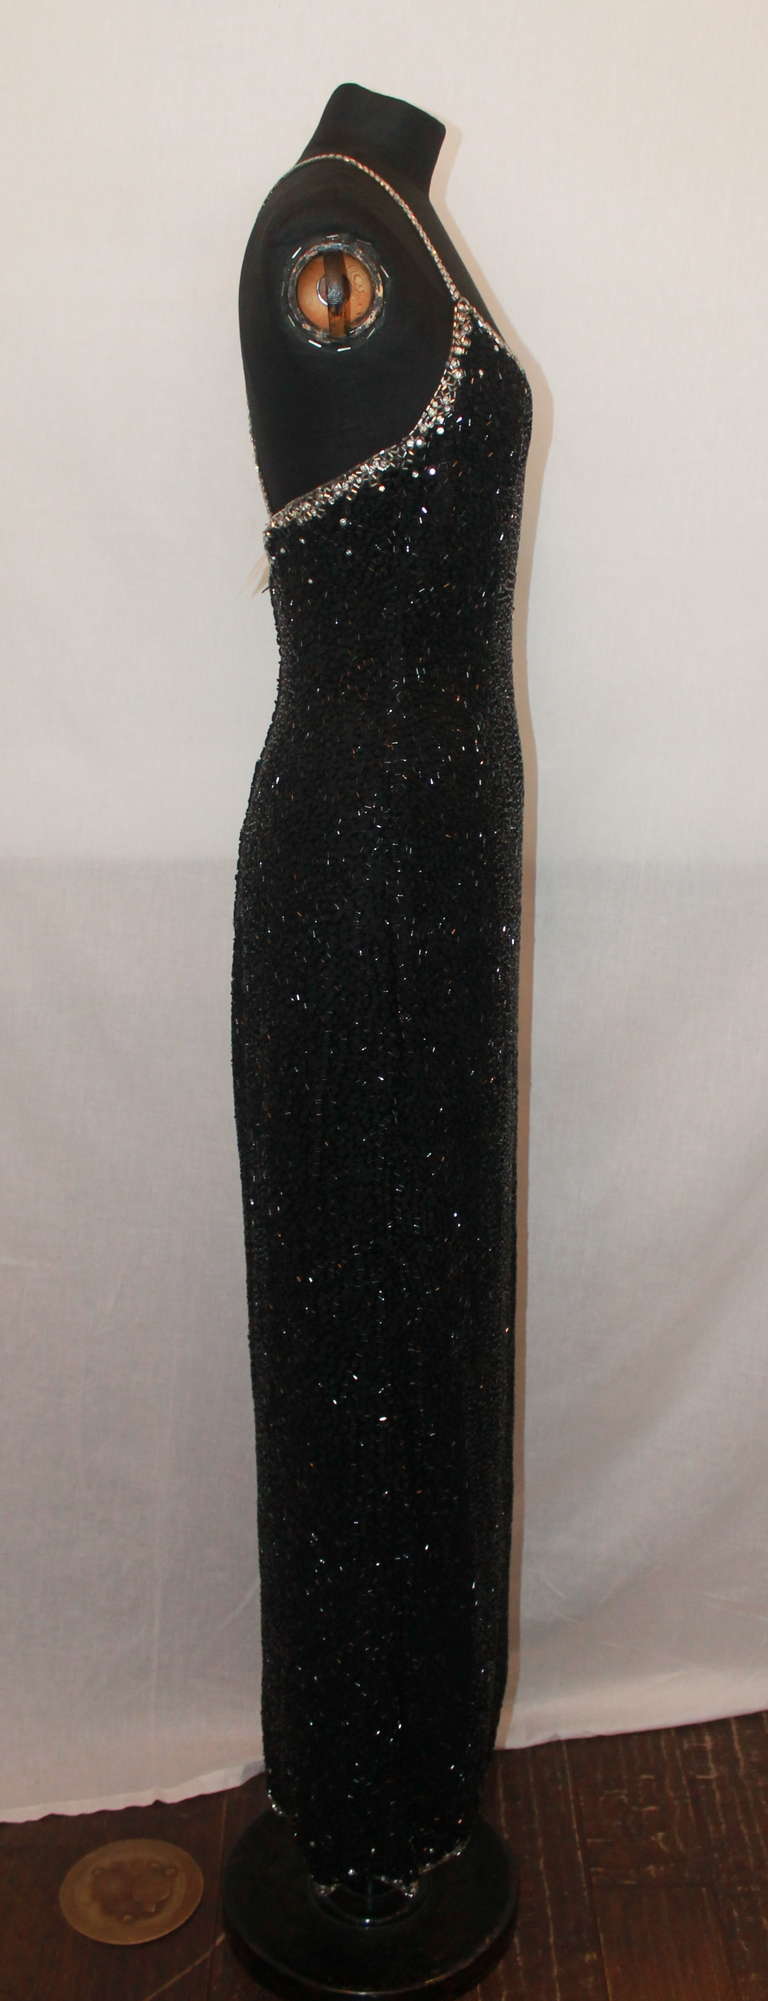 Women's Unknown Vintage Black & Silver Beaded Gown - 6